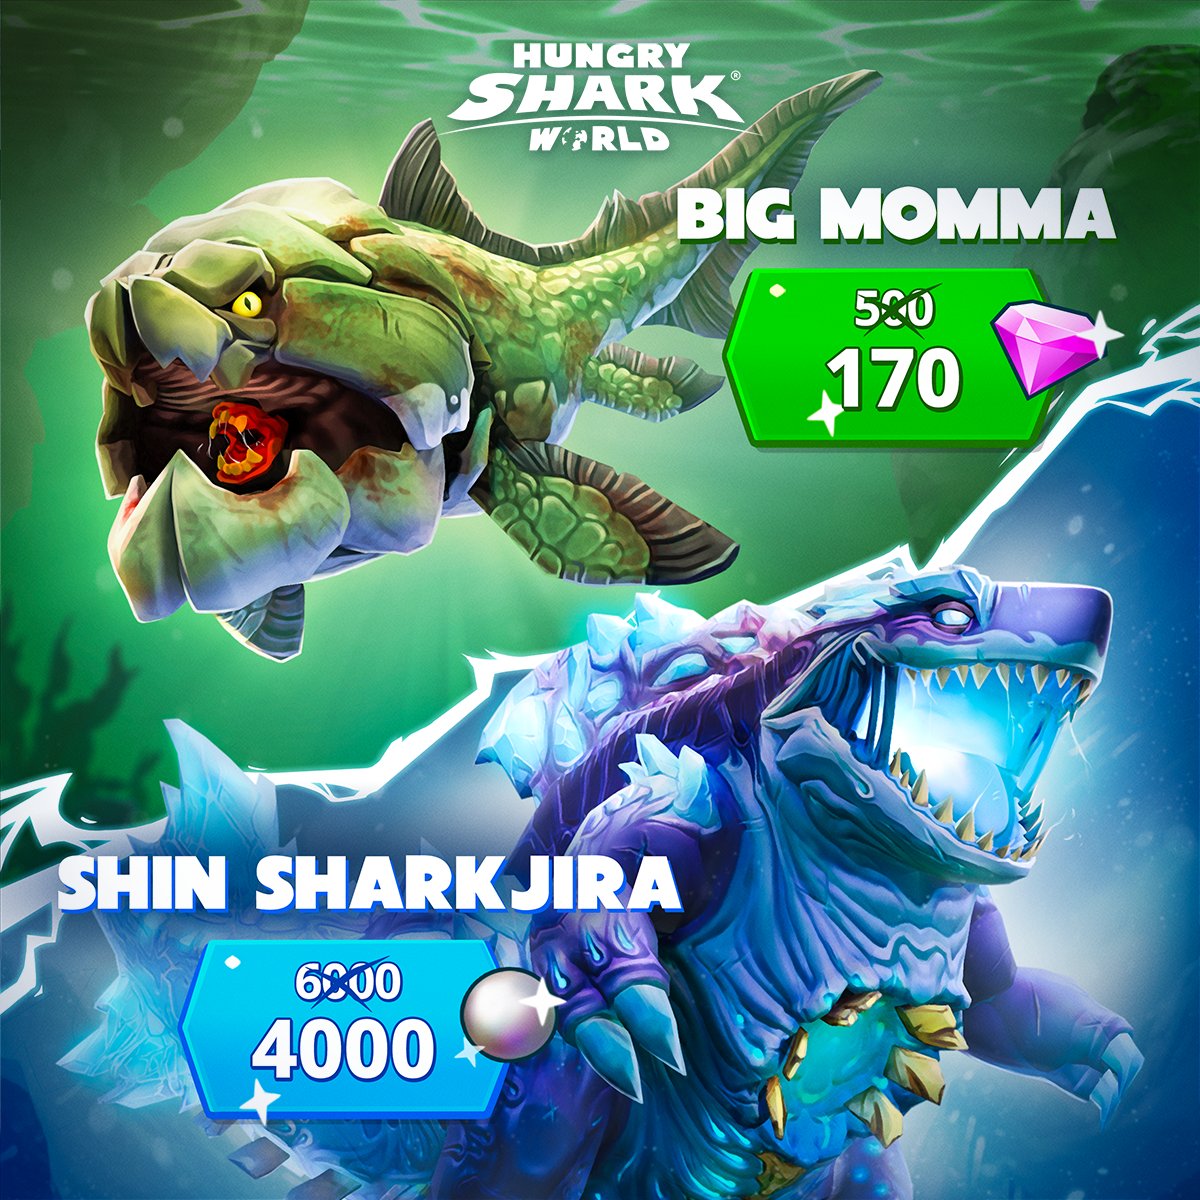 Dive into a new discount in #HungrySharkWorld! 😎 Unleash the power of Big Momma and Shin Sharkjira at a reduced price! 😱 Get them now and rule the seas! 🌊 #HSW